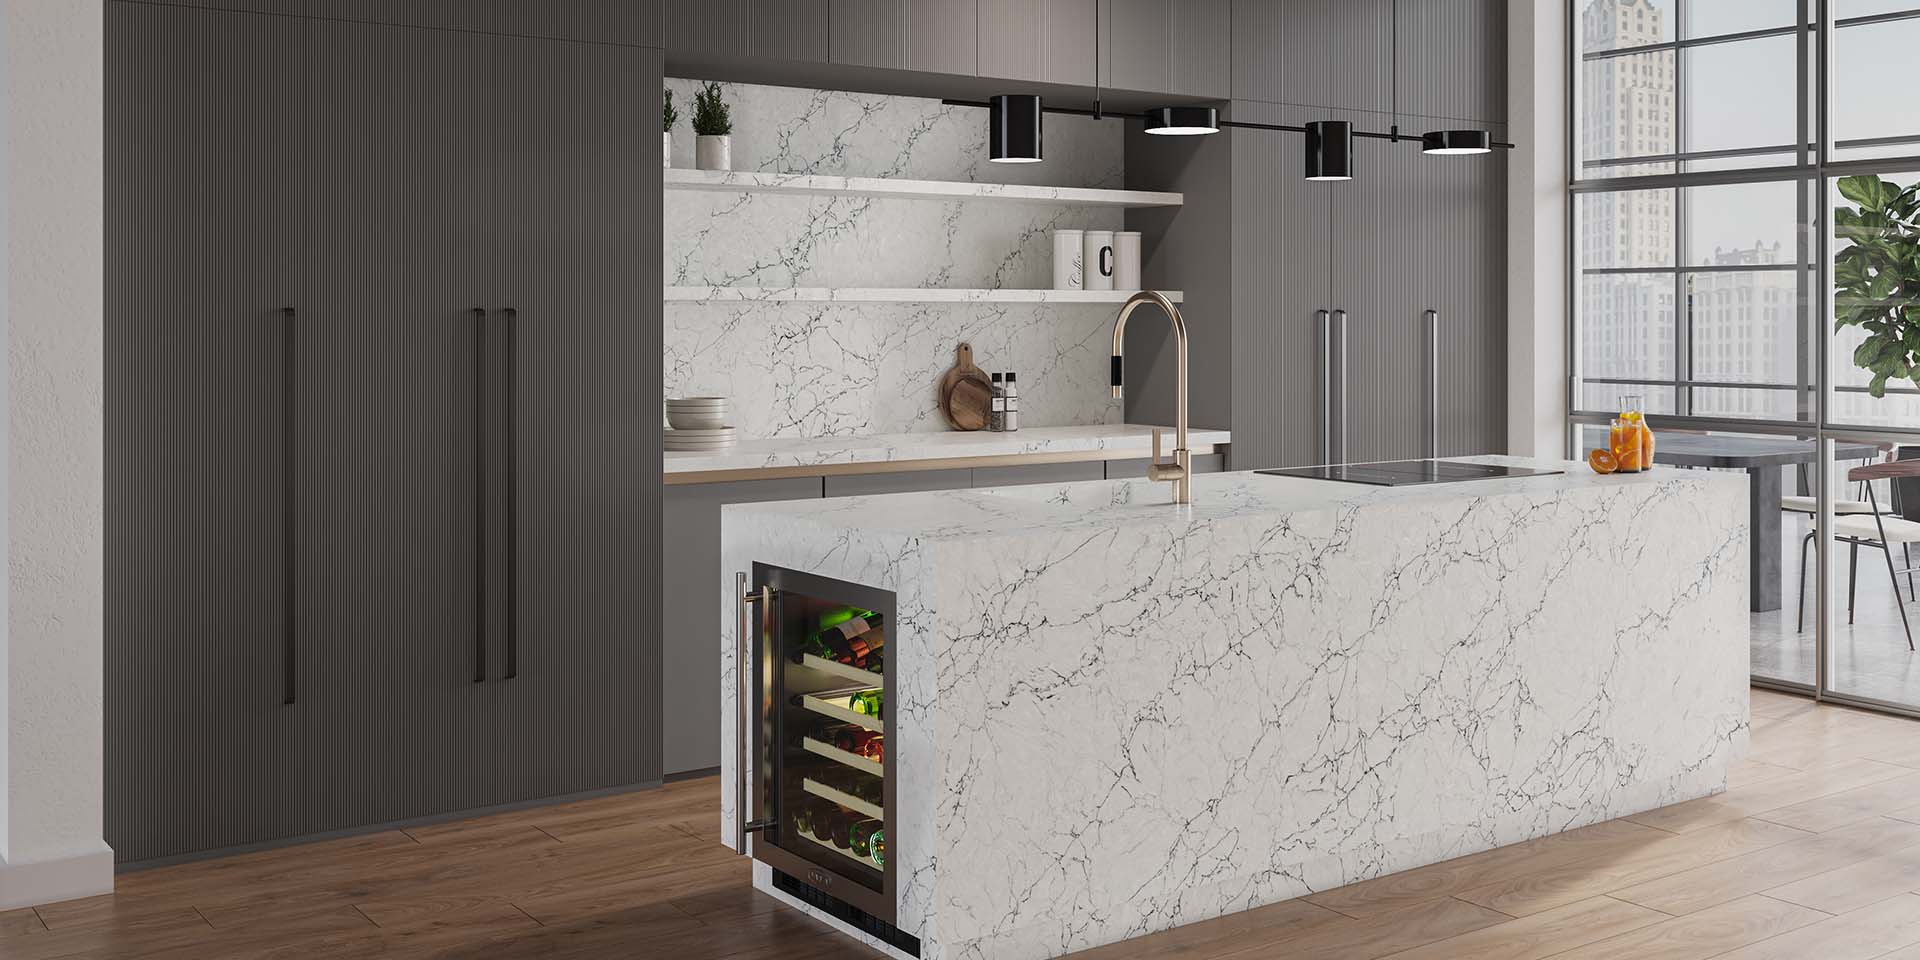 A wrapped marble-look quartz kitchen island pops against sleek charcoal, floor-to-ceiling cabinetry.